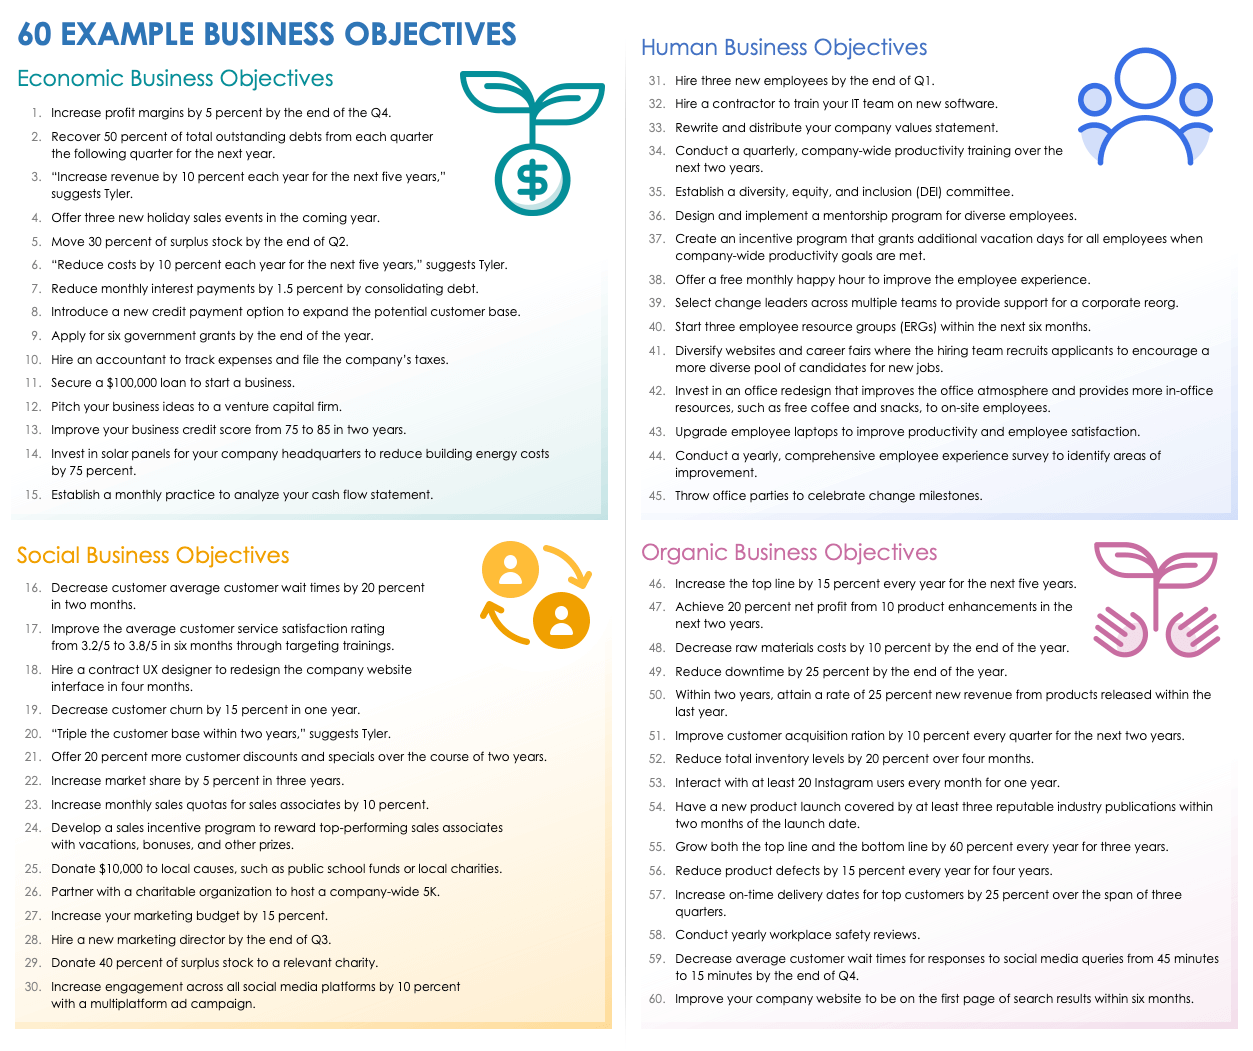 60 Example Business Objectives